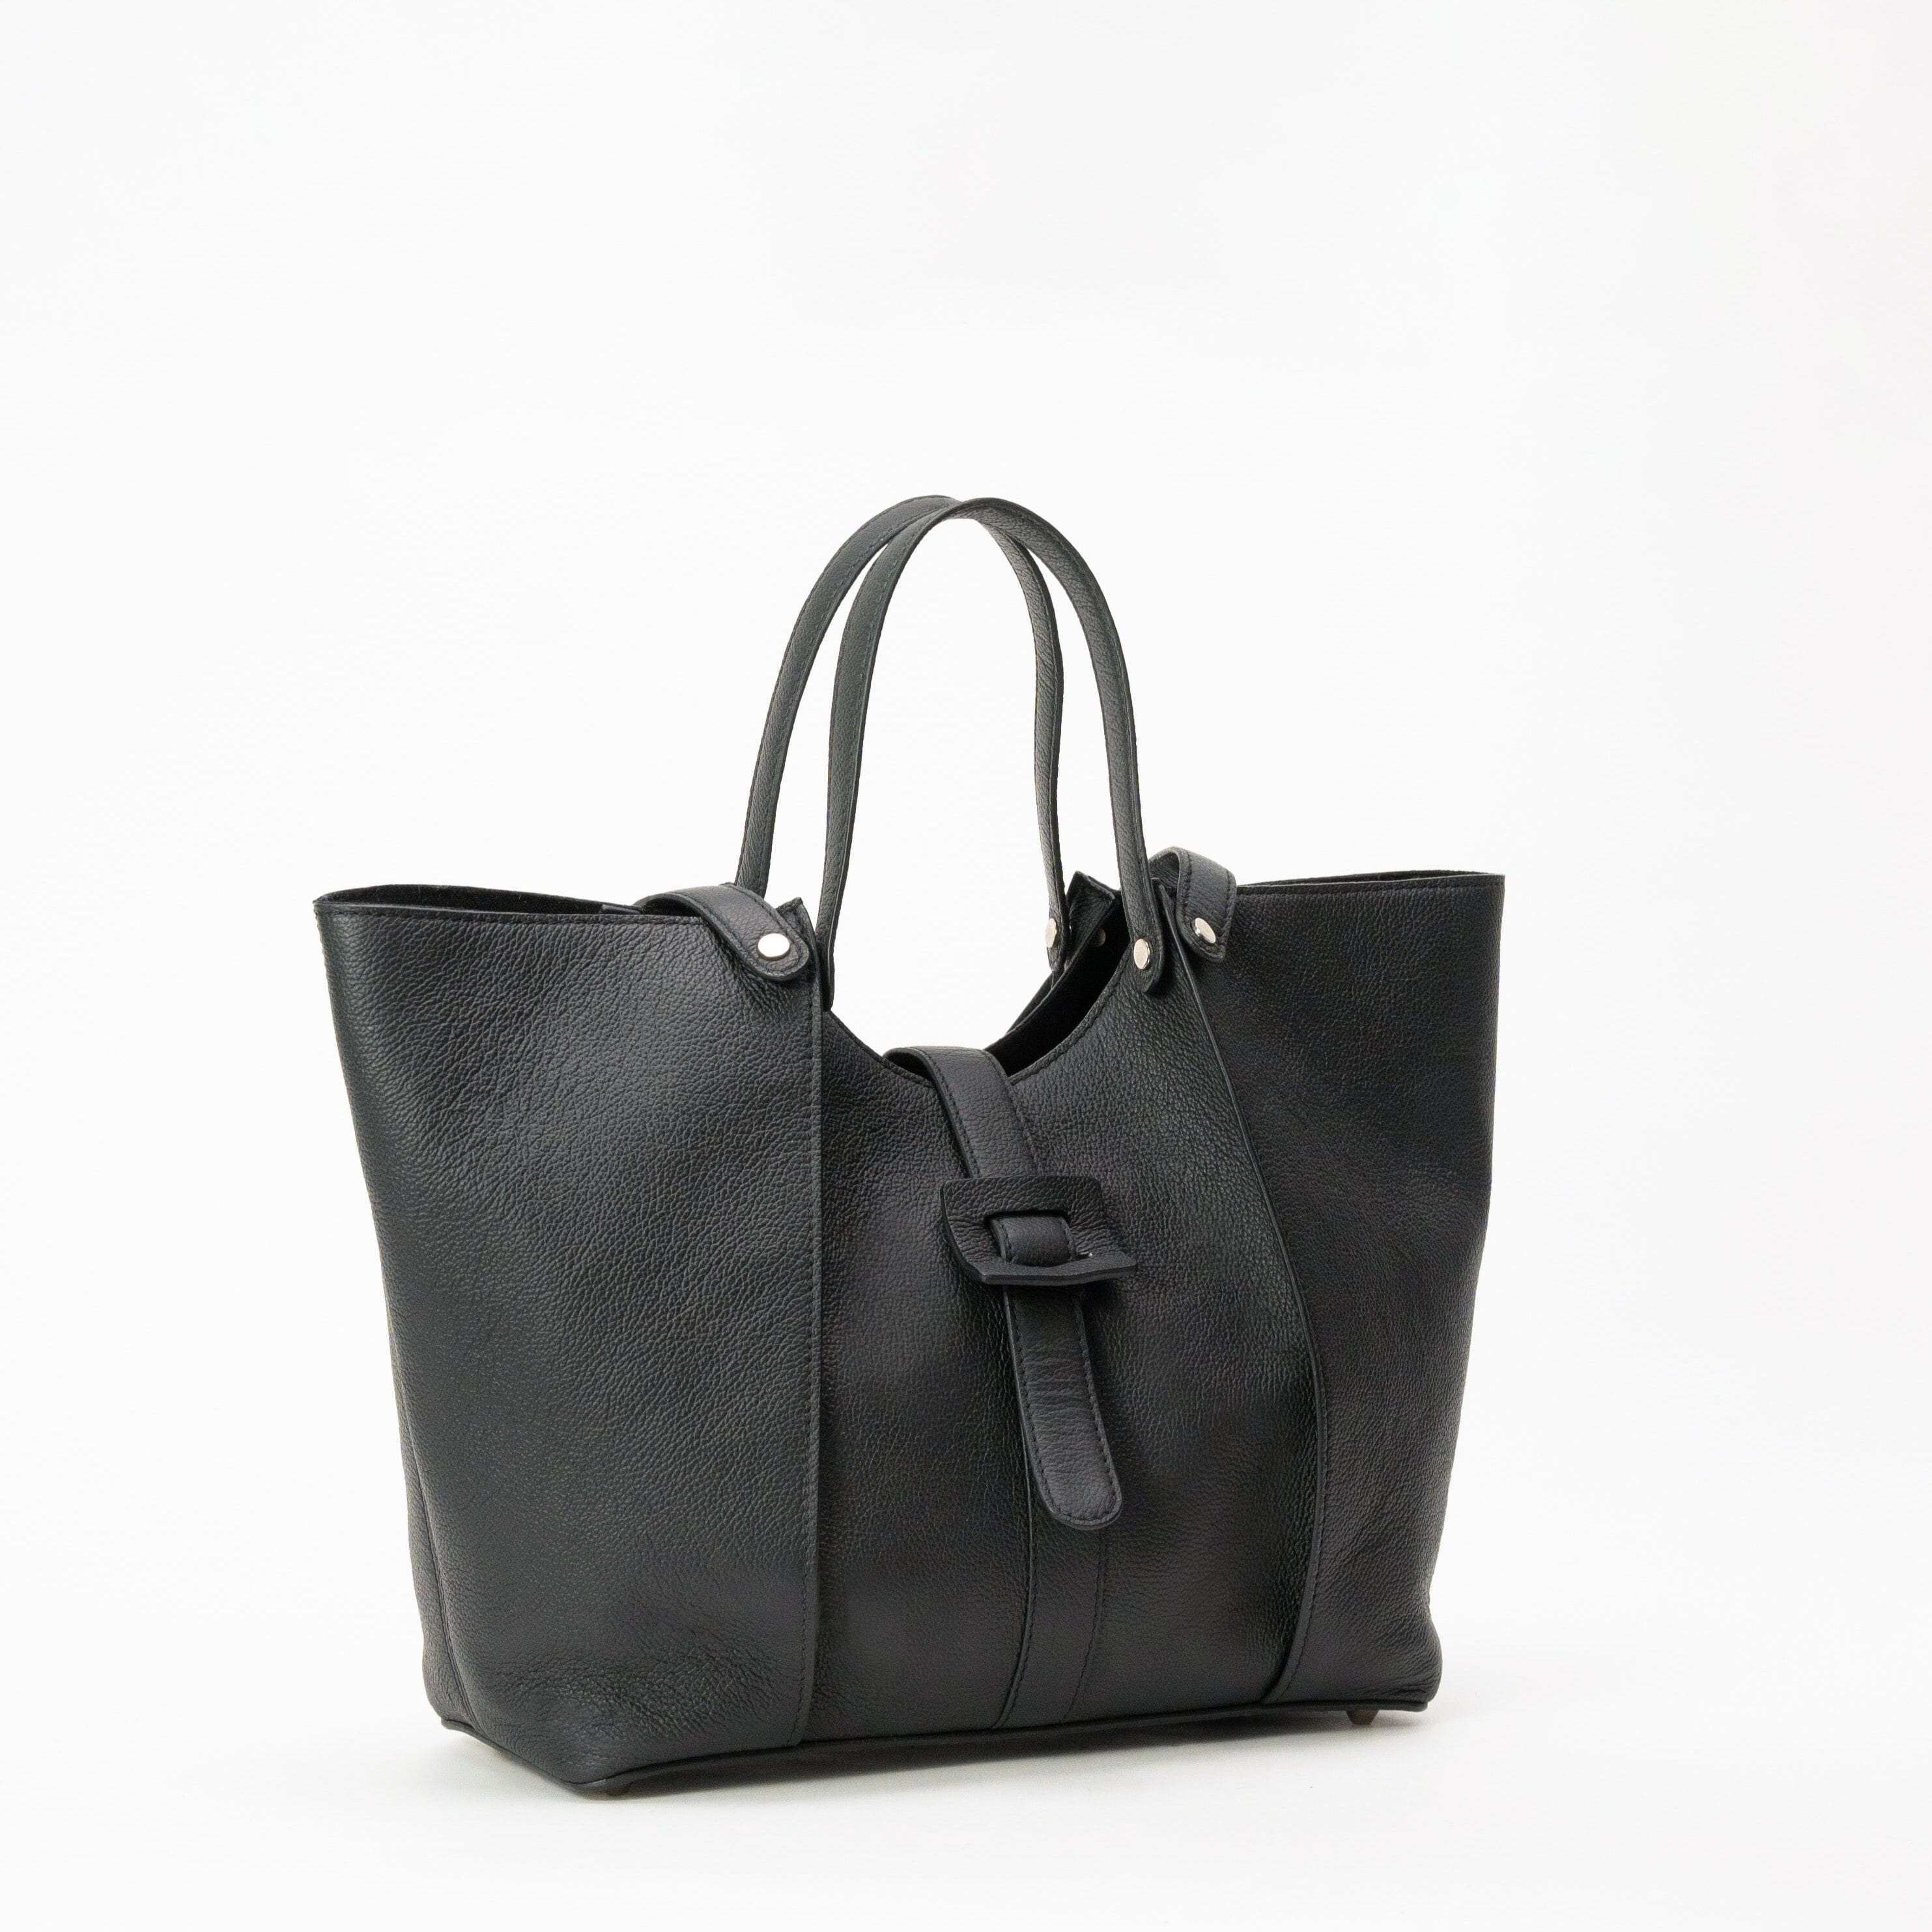 Madison Tote in Pebbled Black